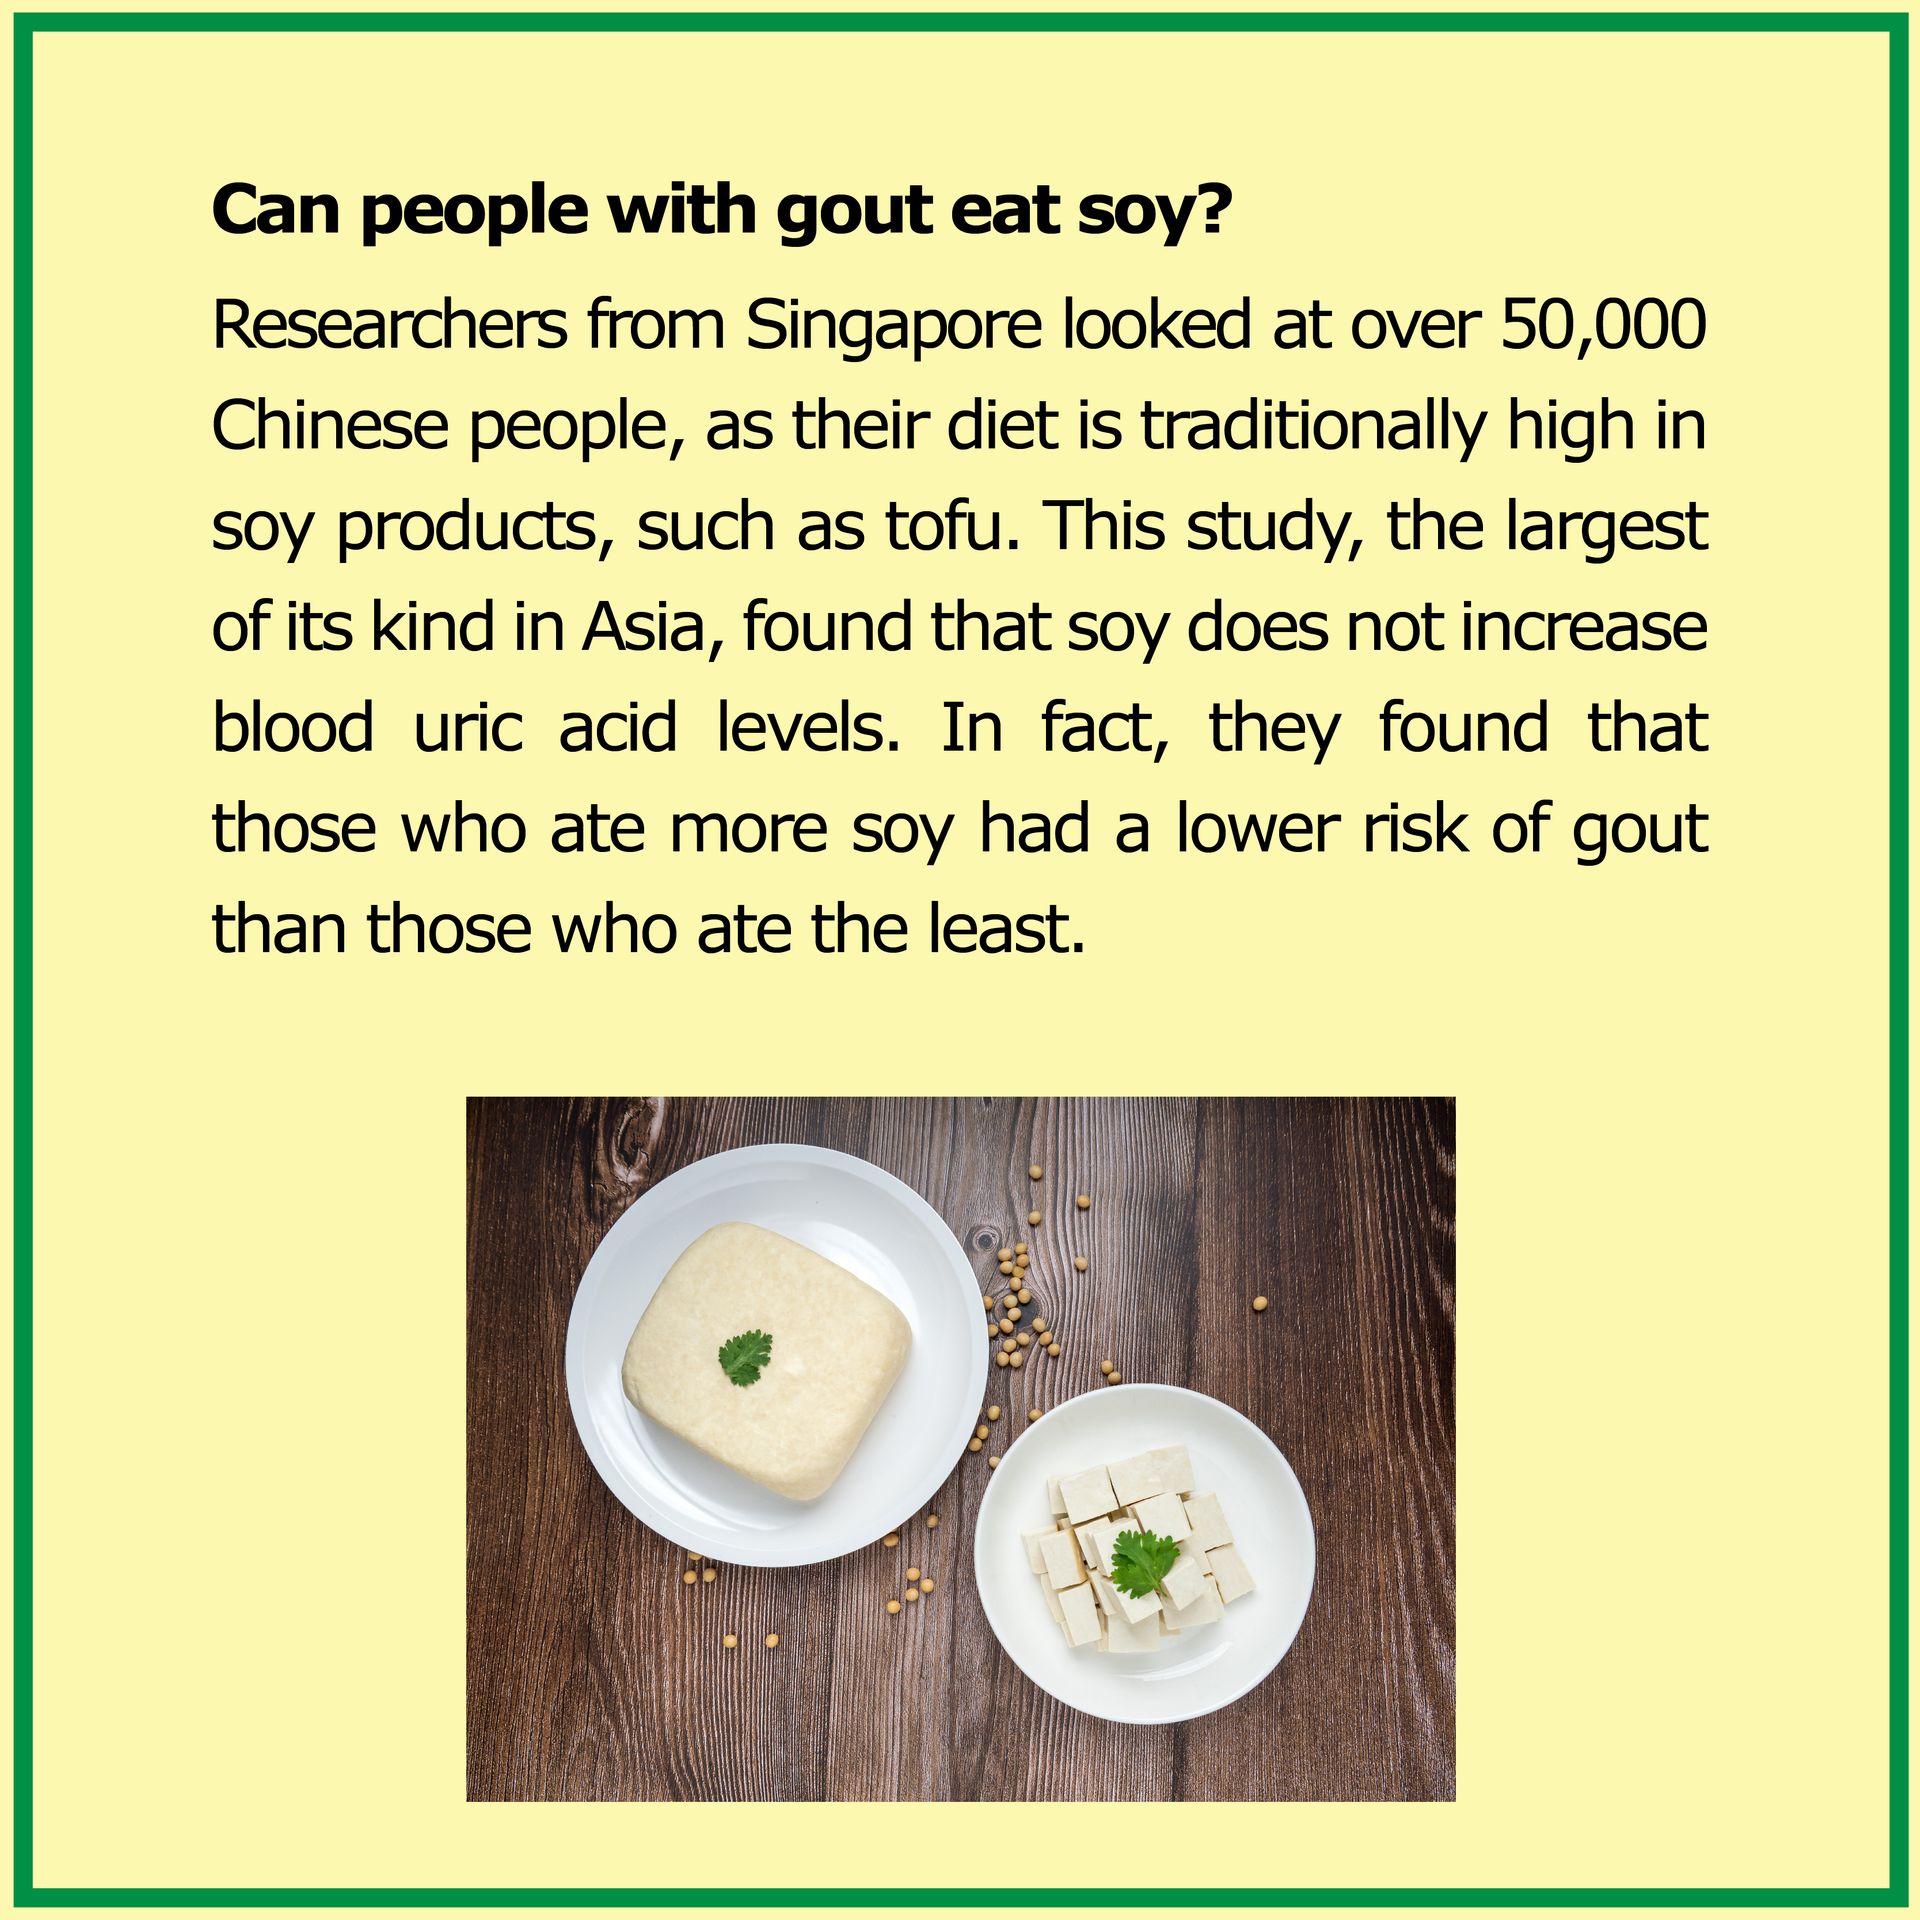 Can people with gout eat soy?